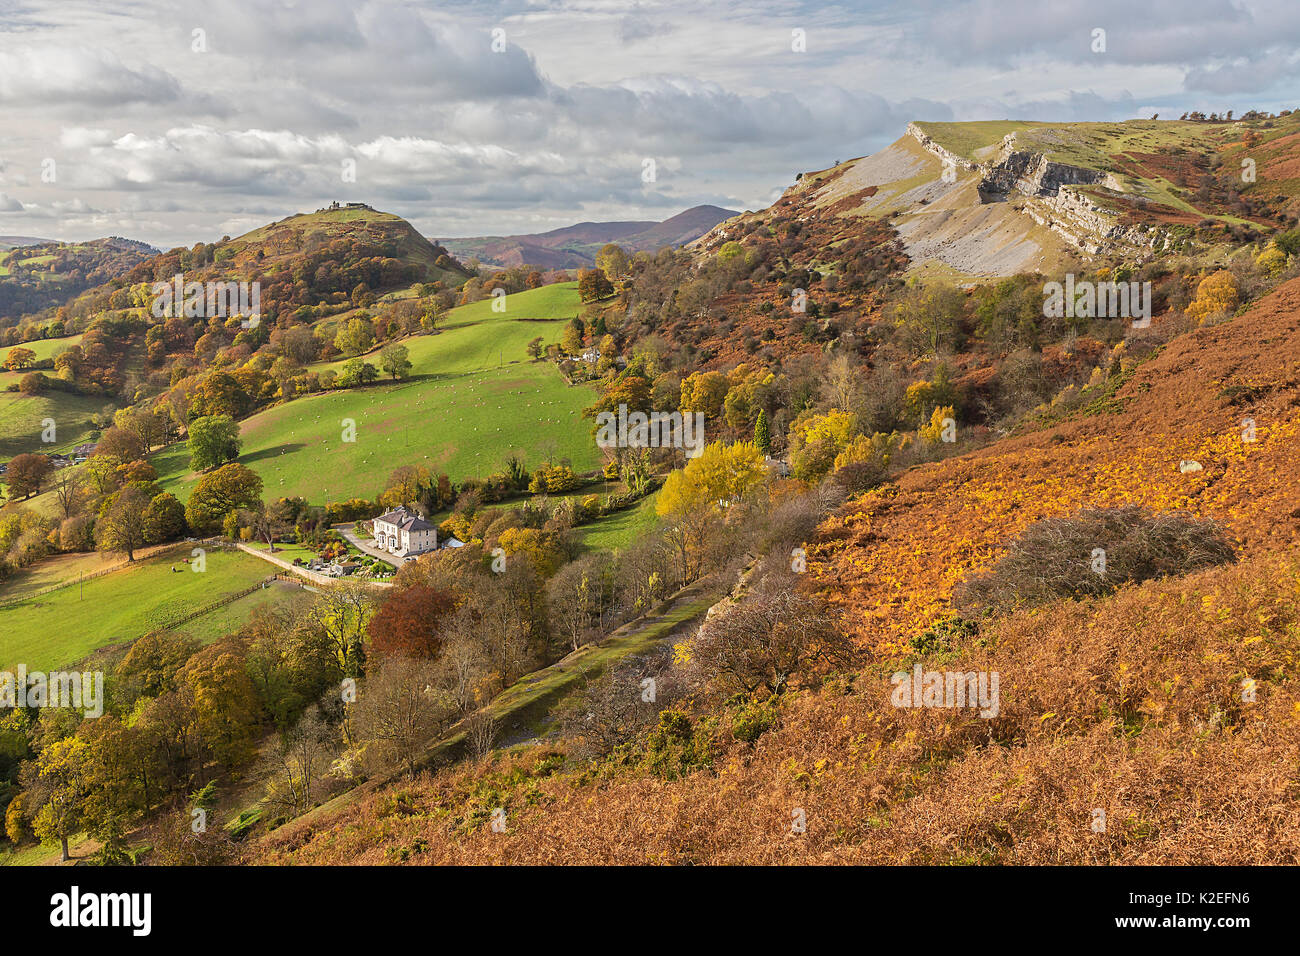 Looking west from the Panorama walk on the Offa's Dyke path on Ruabon Mountain near LLangollen with Castell Dinas Bran at the top of the hill centre left and the Eglwyseg limestone escarpment on the right North Wales, UK, November 2016. Stock Photo